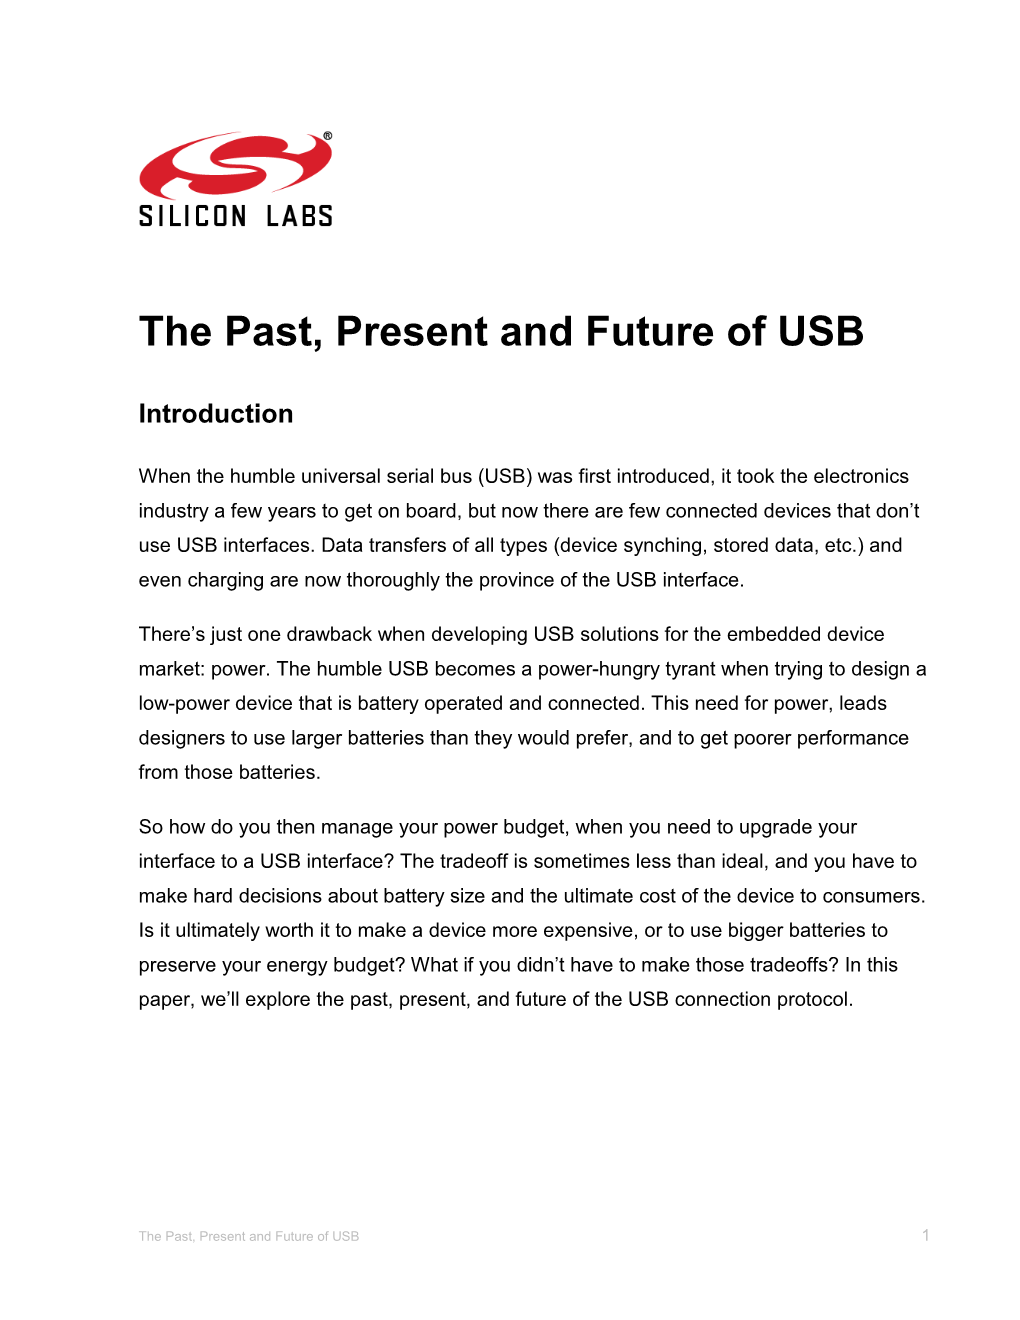 The Past, Present and Future of USB